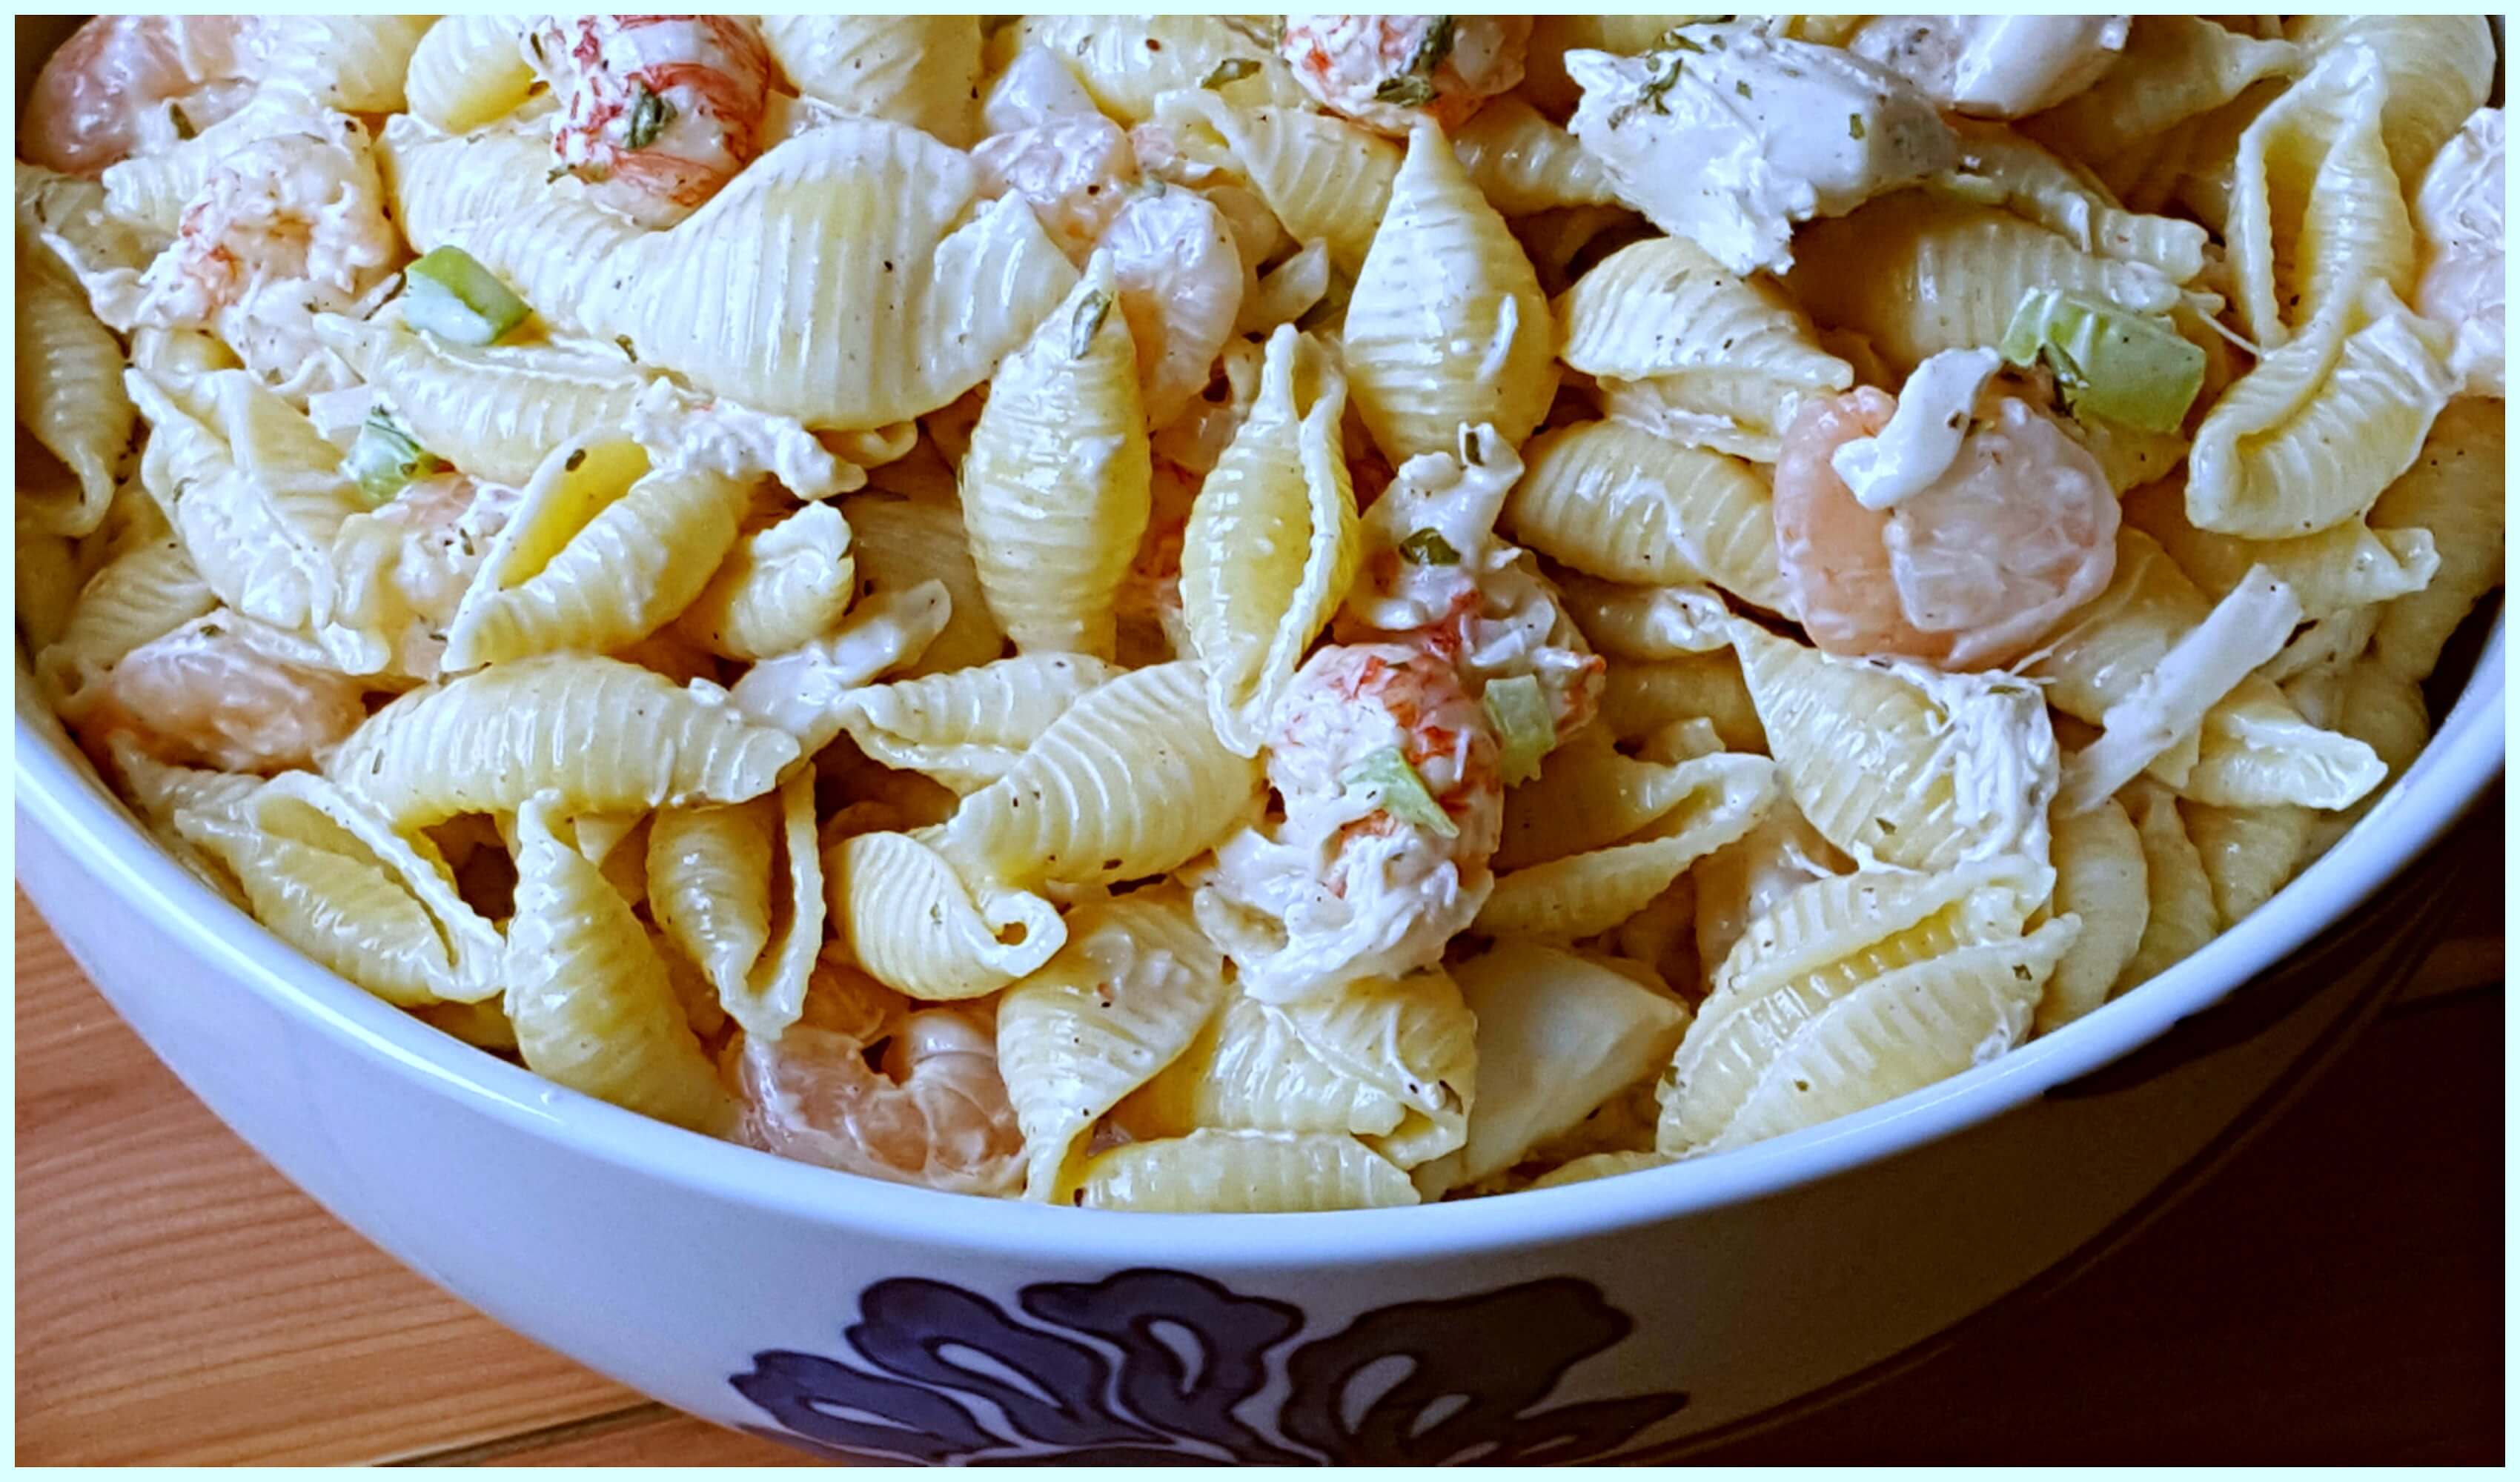 Seafood Salad with seashell pasta in a blue and white bowl